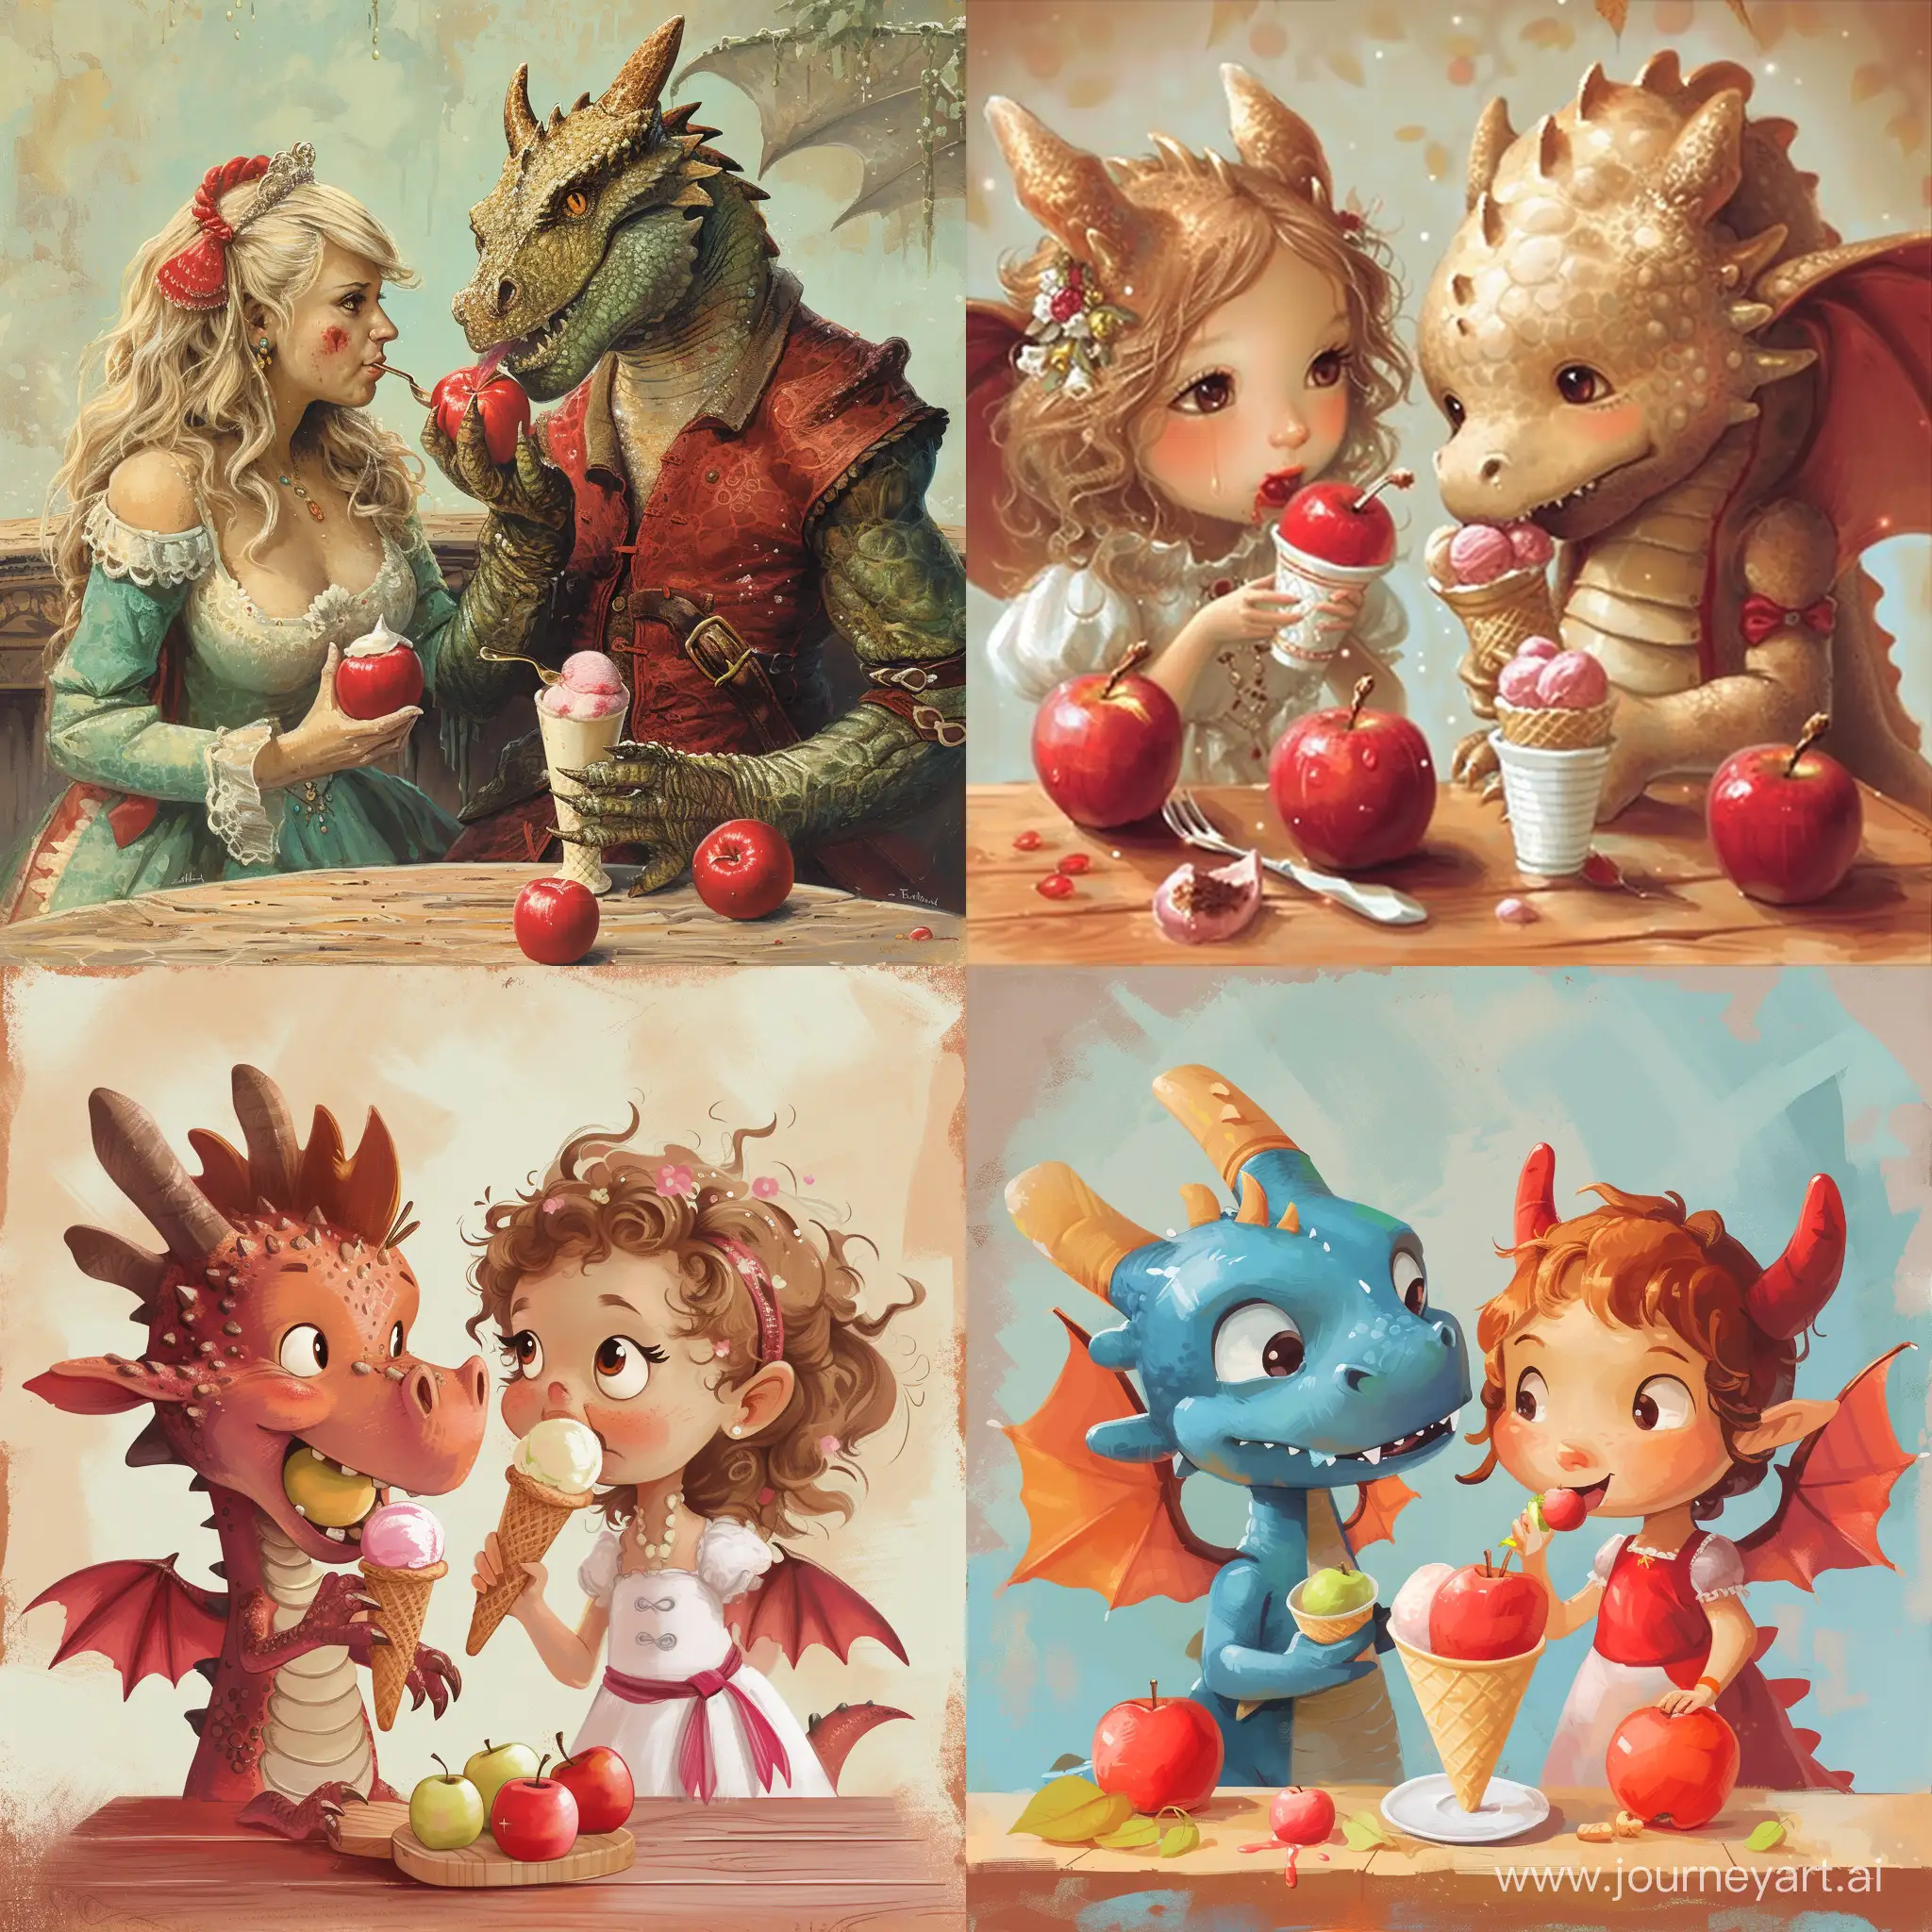 Enchanting-Encounter-Princess-and-Dragon-Indulge-in-Apples-and-Ice-Cream